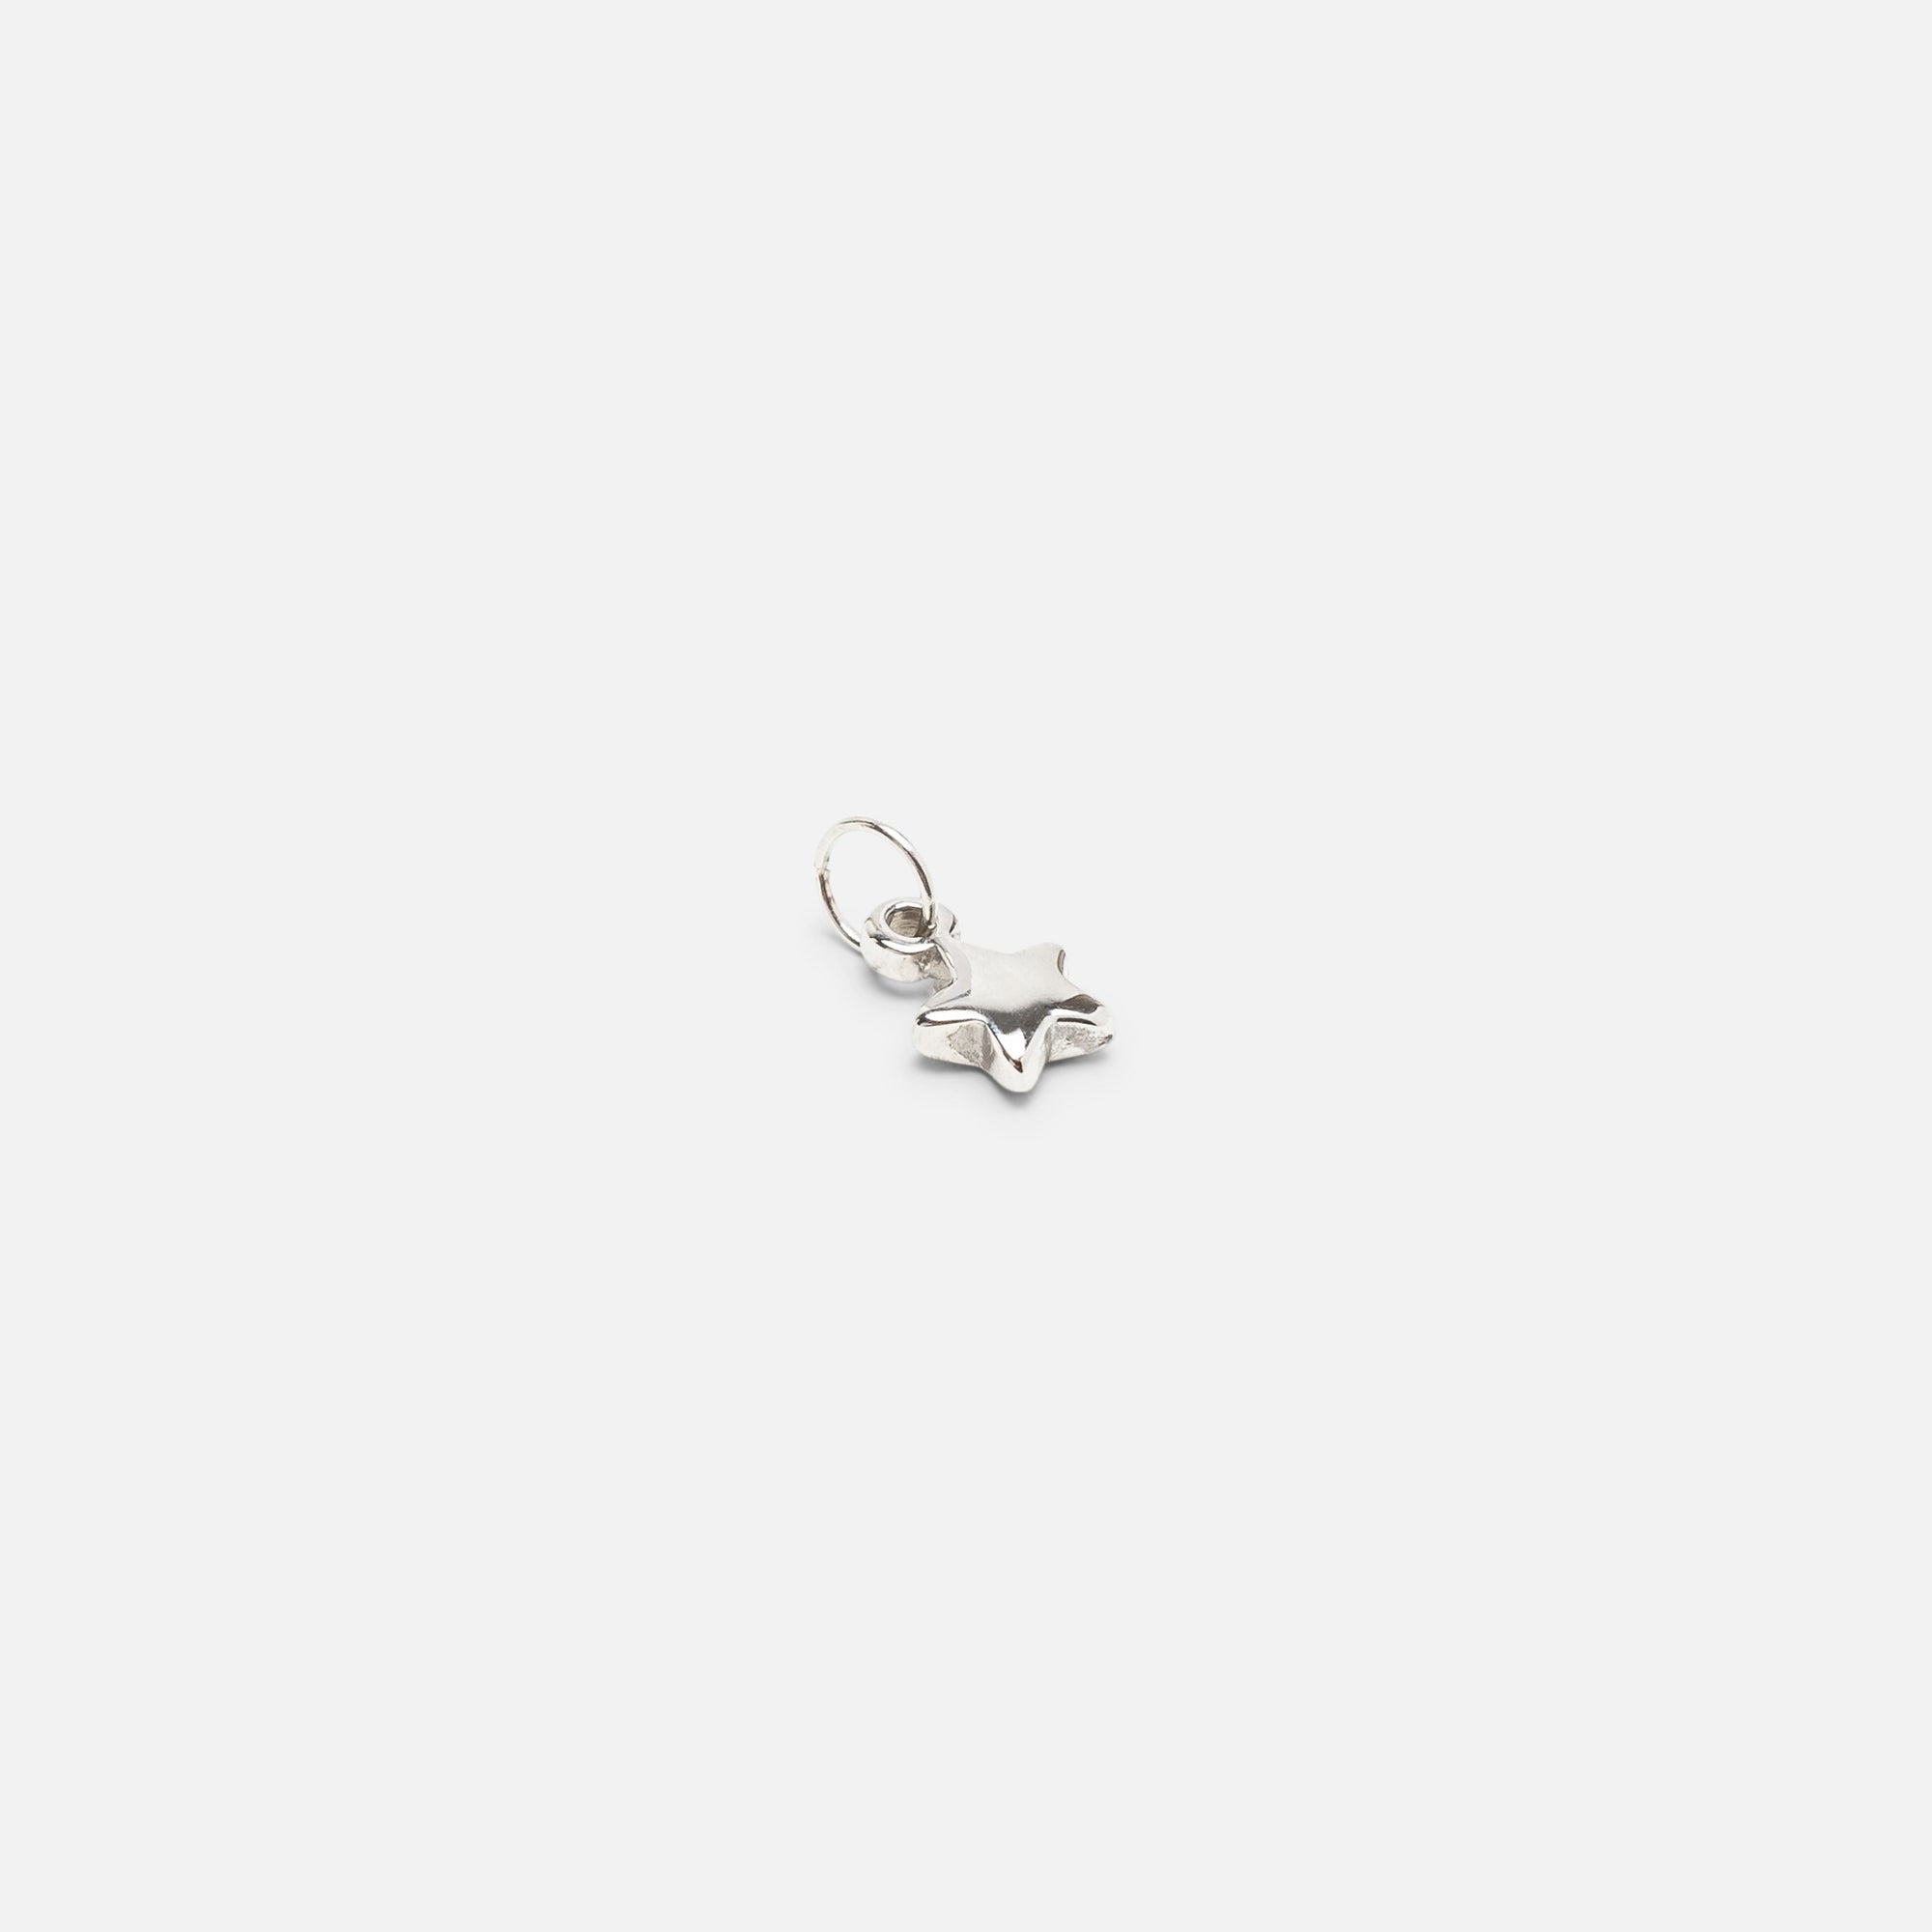 Small silver star charm